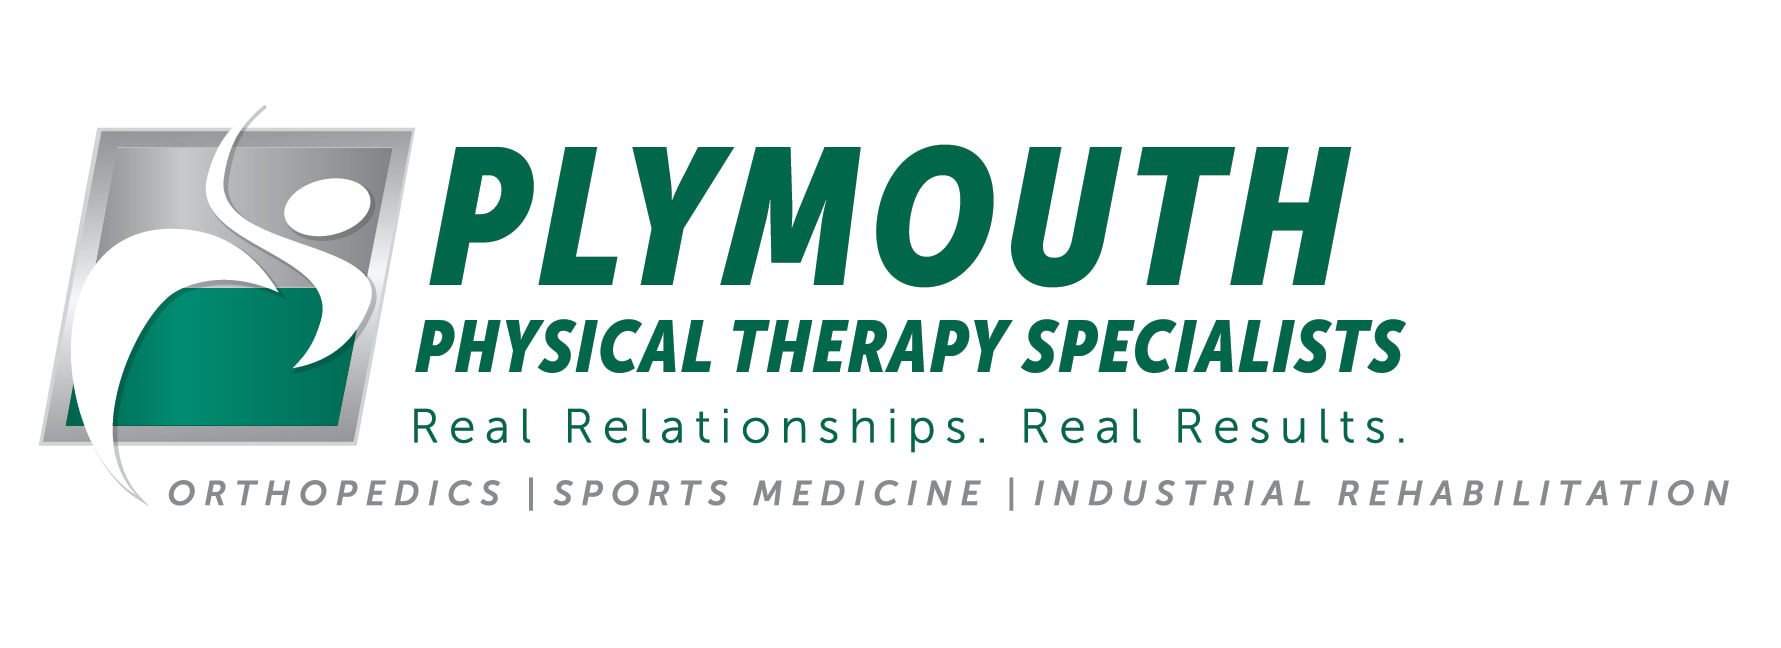 plymouth physical therapy logo orig